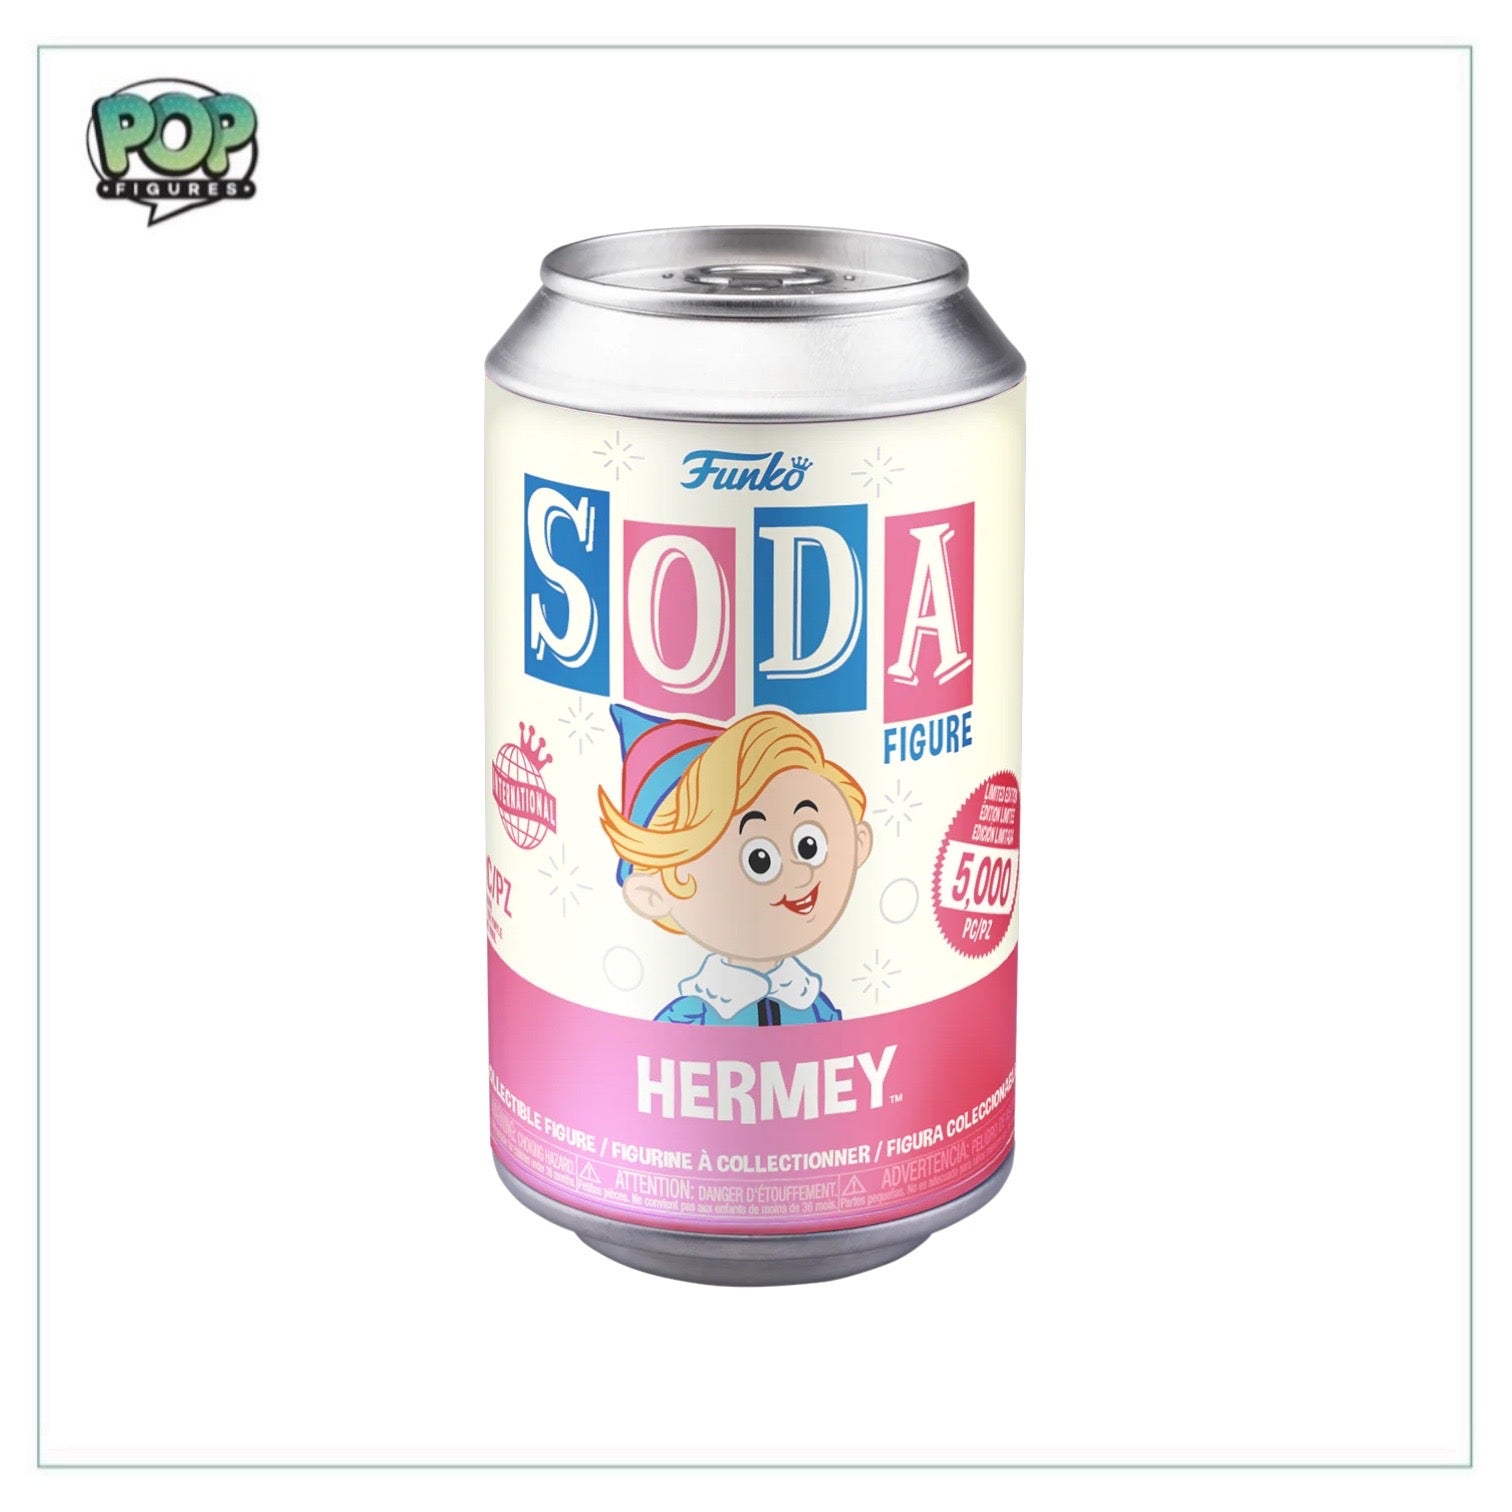 Hermey Funko Soda Vinyl Figure! - Rudolph The Red-Nosed Reindeer - International LE5000 Pcs - Chance of Chase